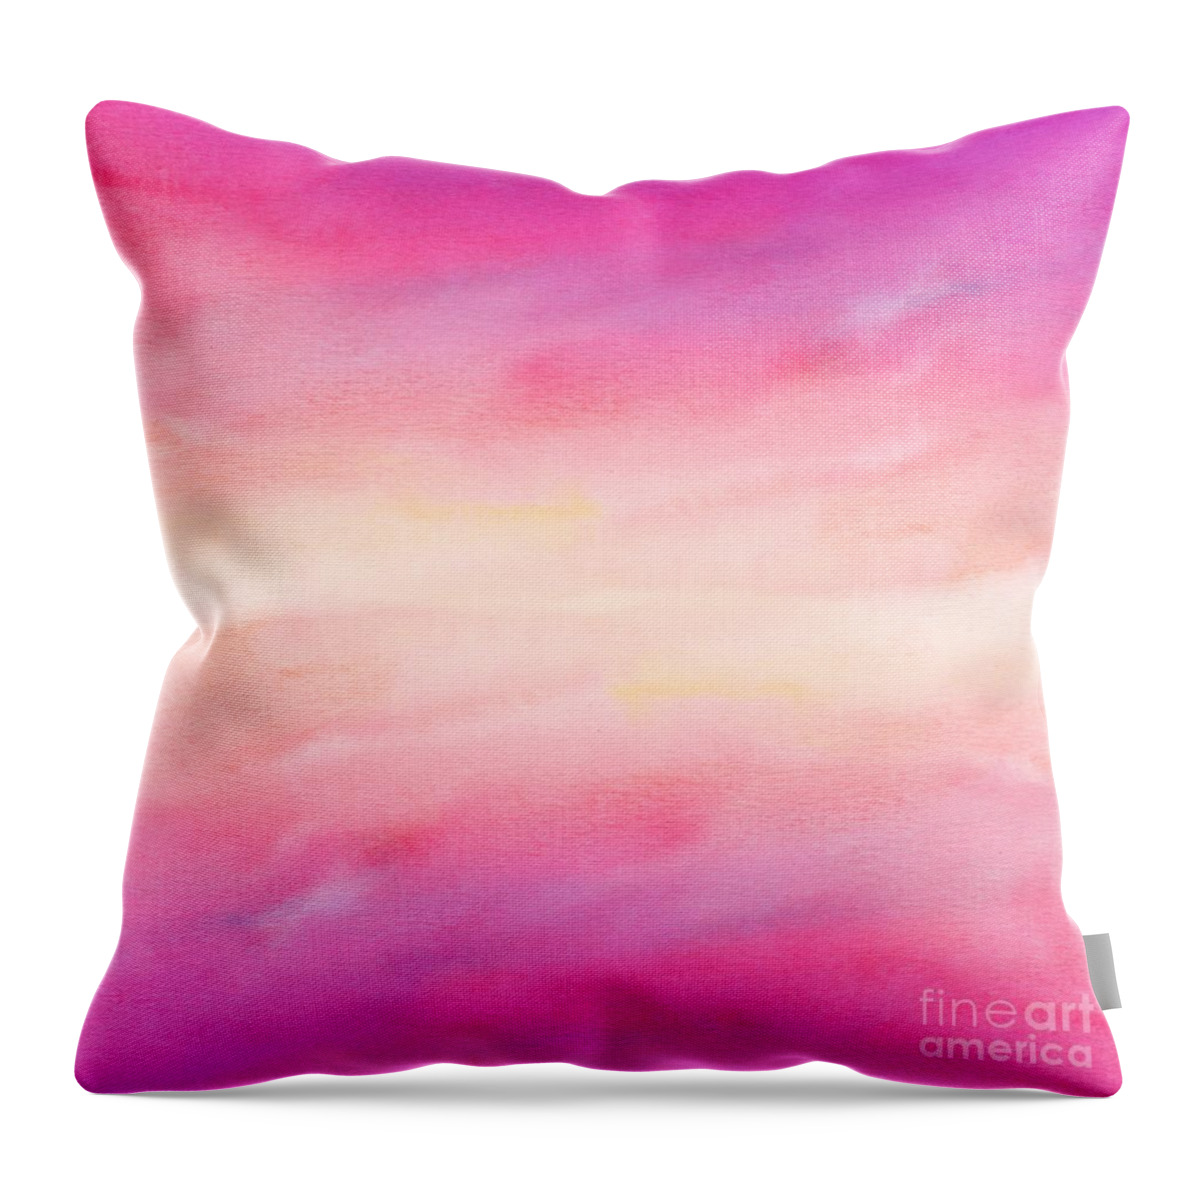 Watercolor Throw Pillow featuring the digital art Cavani - Artistic Colorful Abstract Pink Watercolor Painting Digital Art by Sambel Pedes